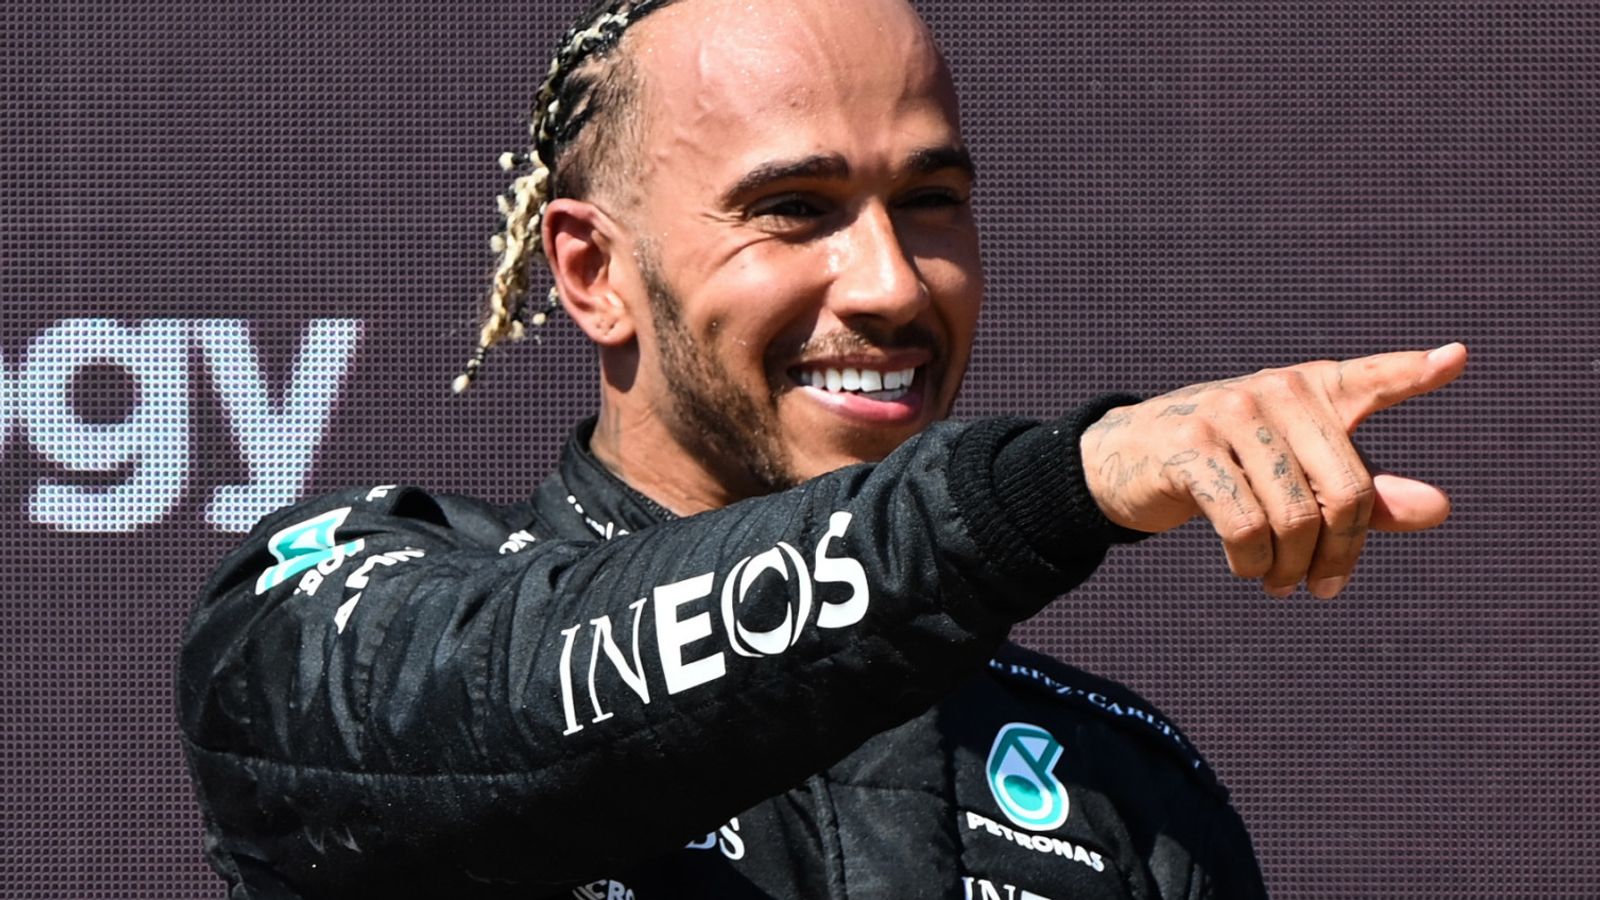 Lewis Hamilton: Mercedes driver bullish on F1 future, ‘with plenty left in the tank’ after 300th race